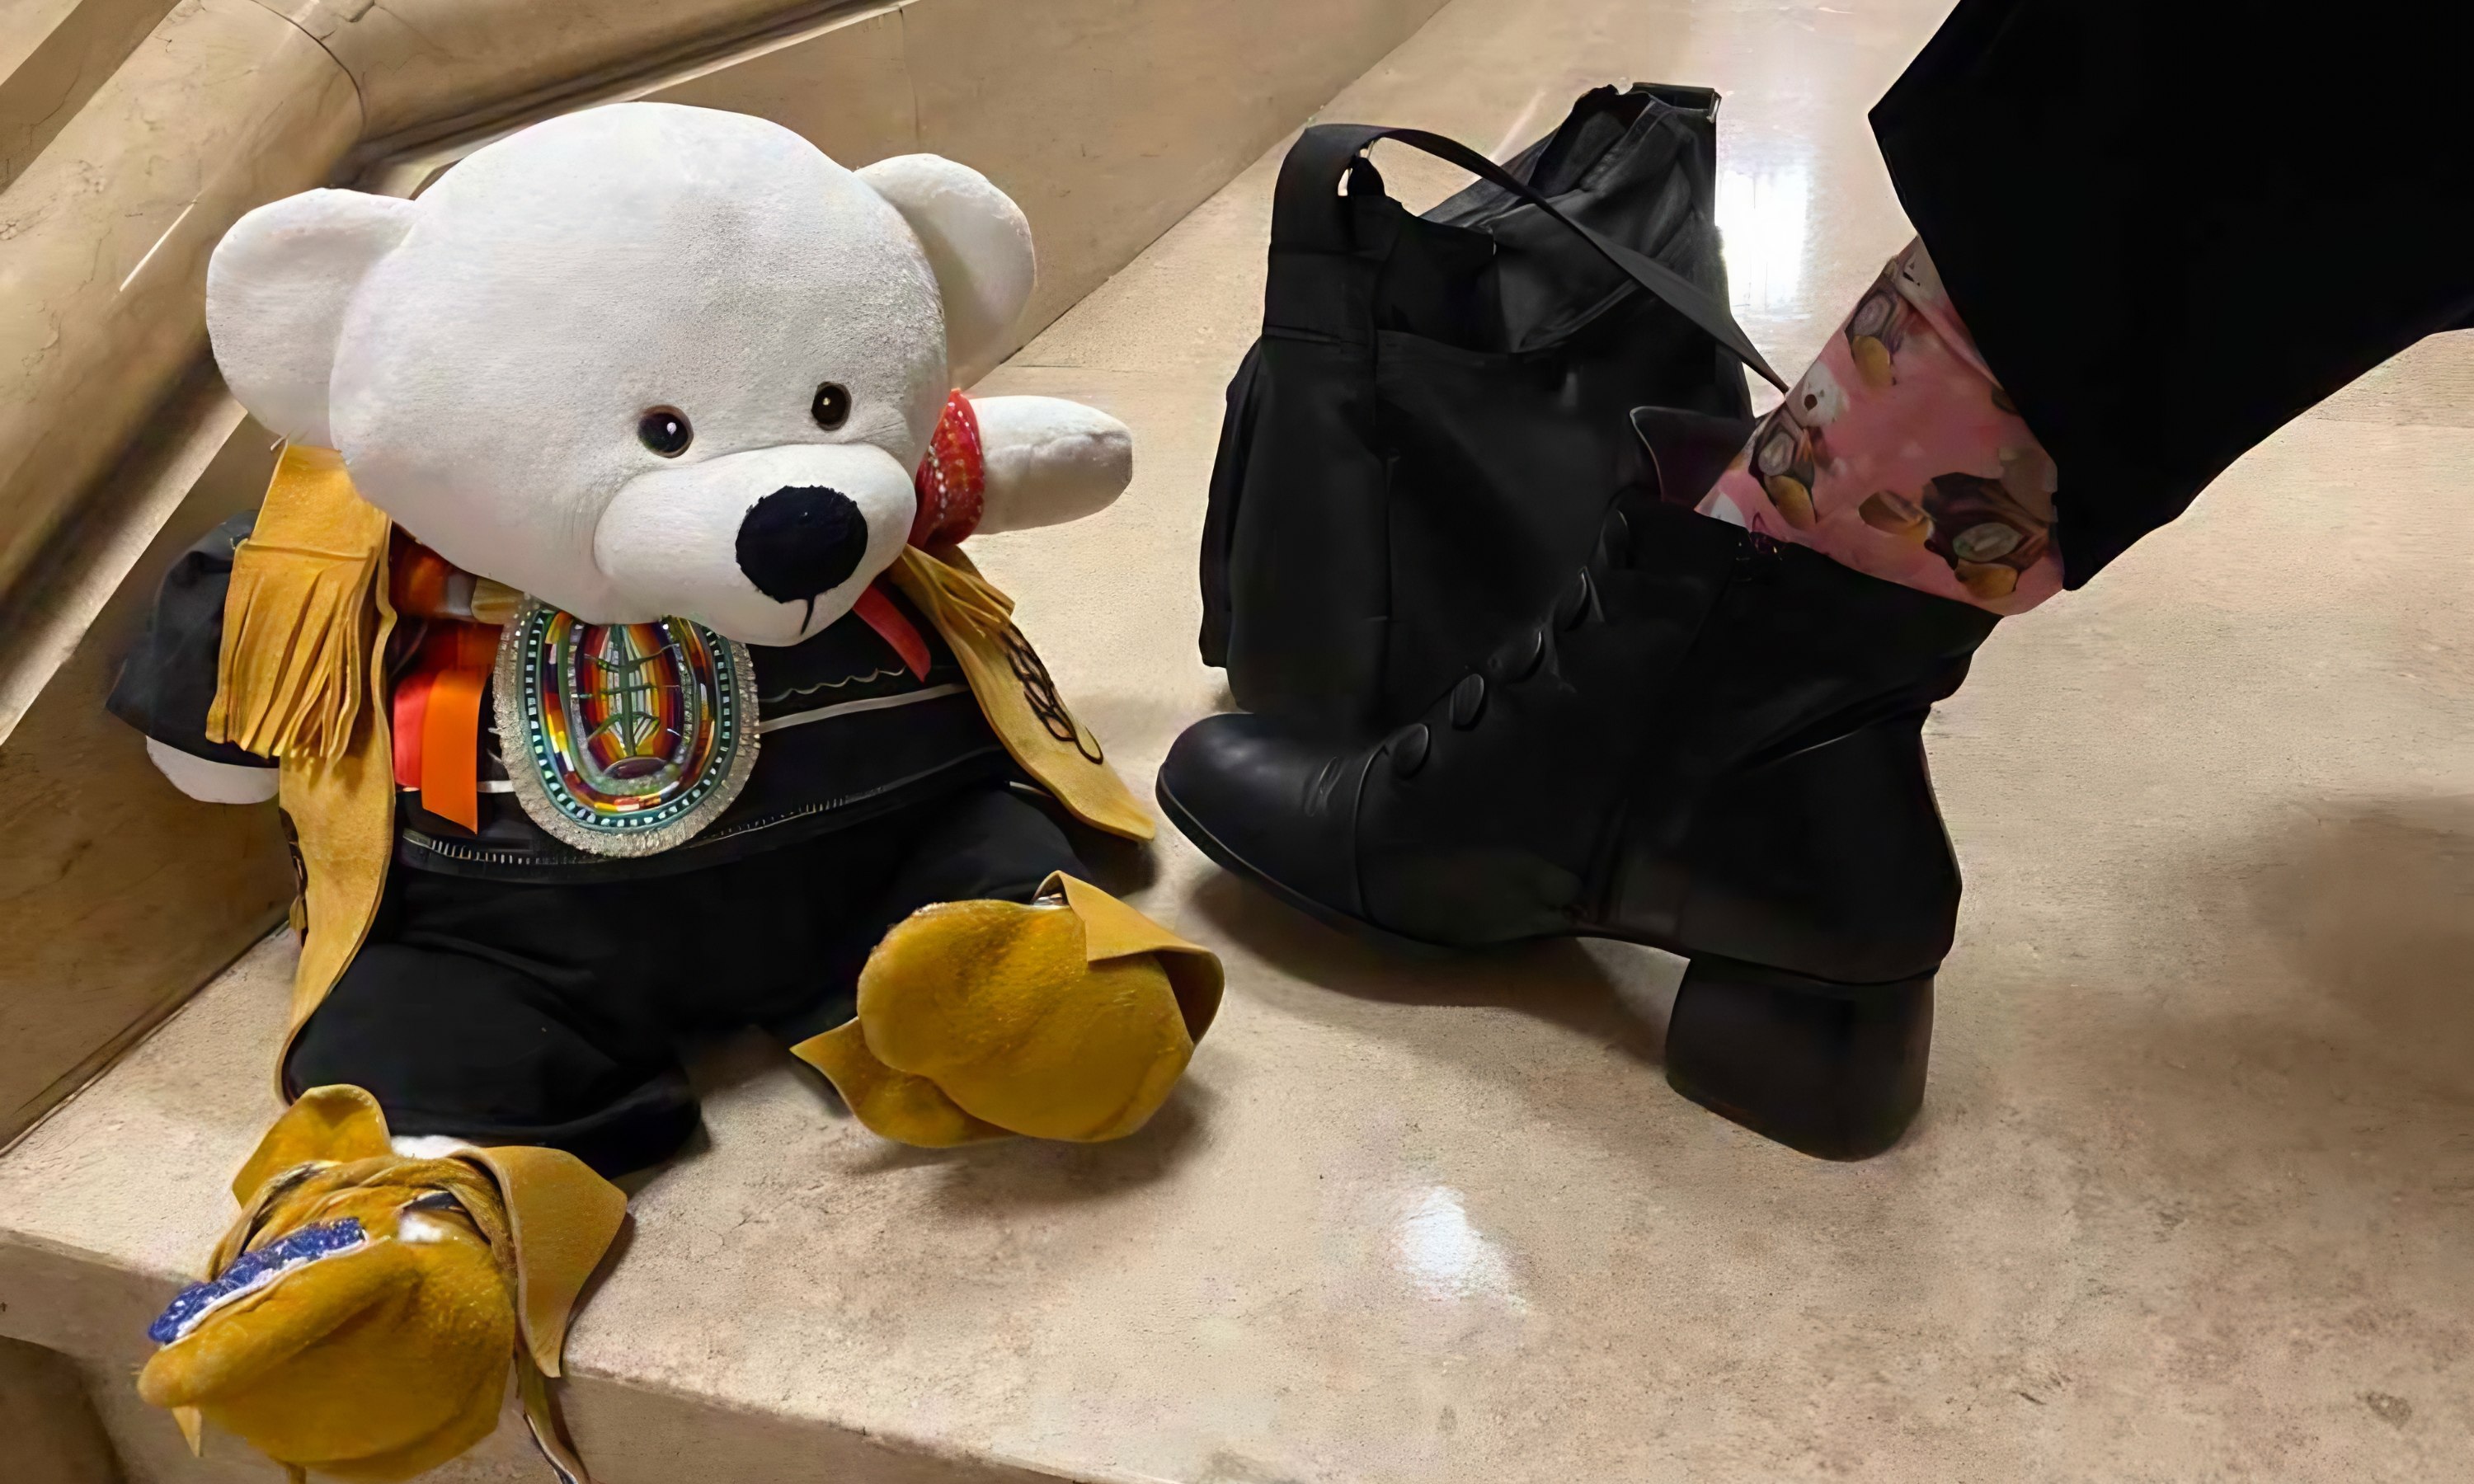 Naiomi Metallic drew inspiration from Spirit Bear, the guiding talisman of the First Nations Child & Family Caring Society, as she presented her case to the Supreme Court of Canada. (Photo: Supplied)